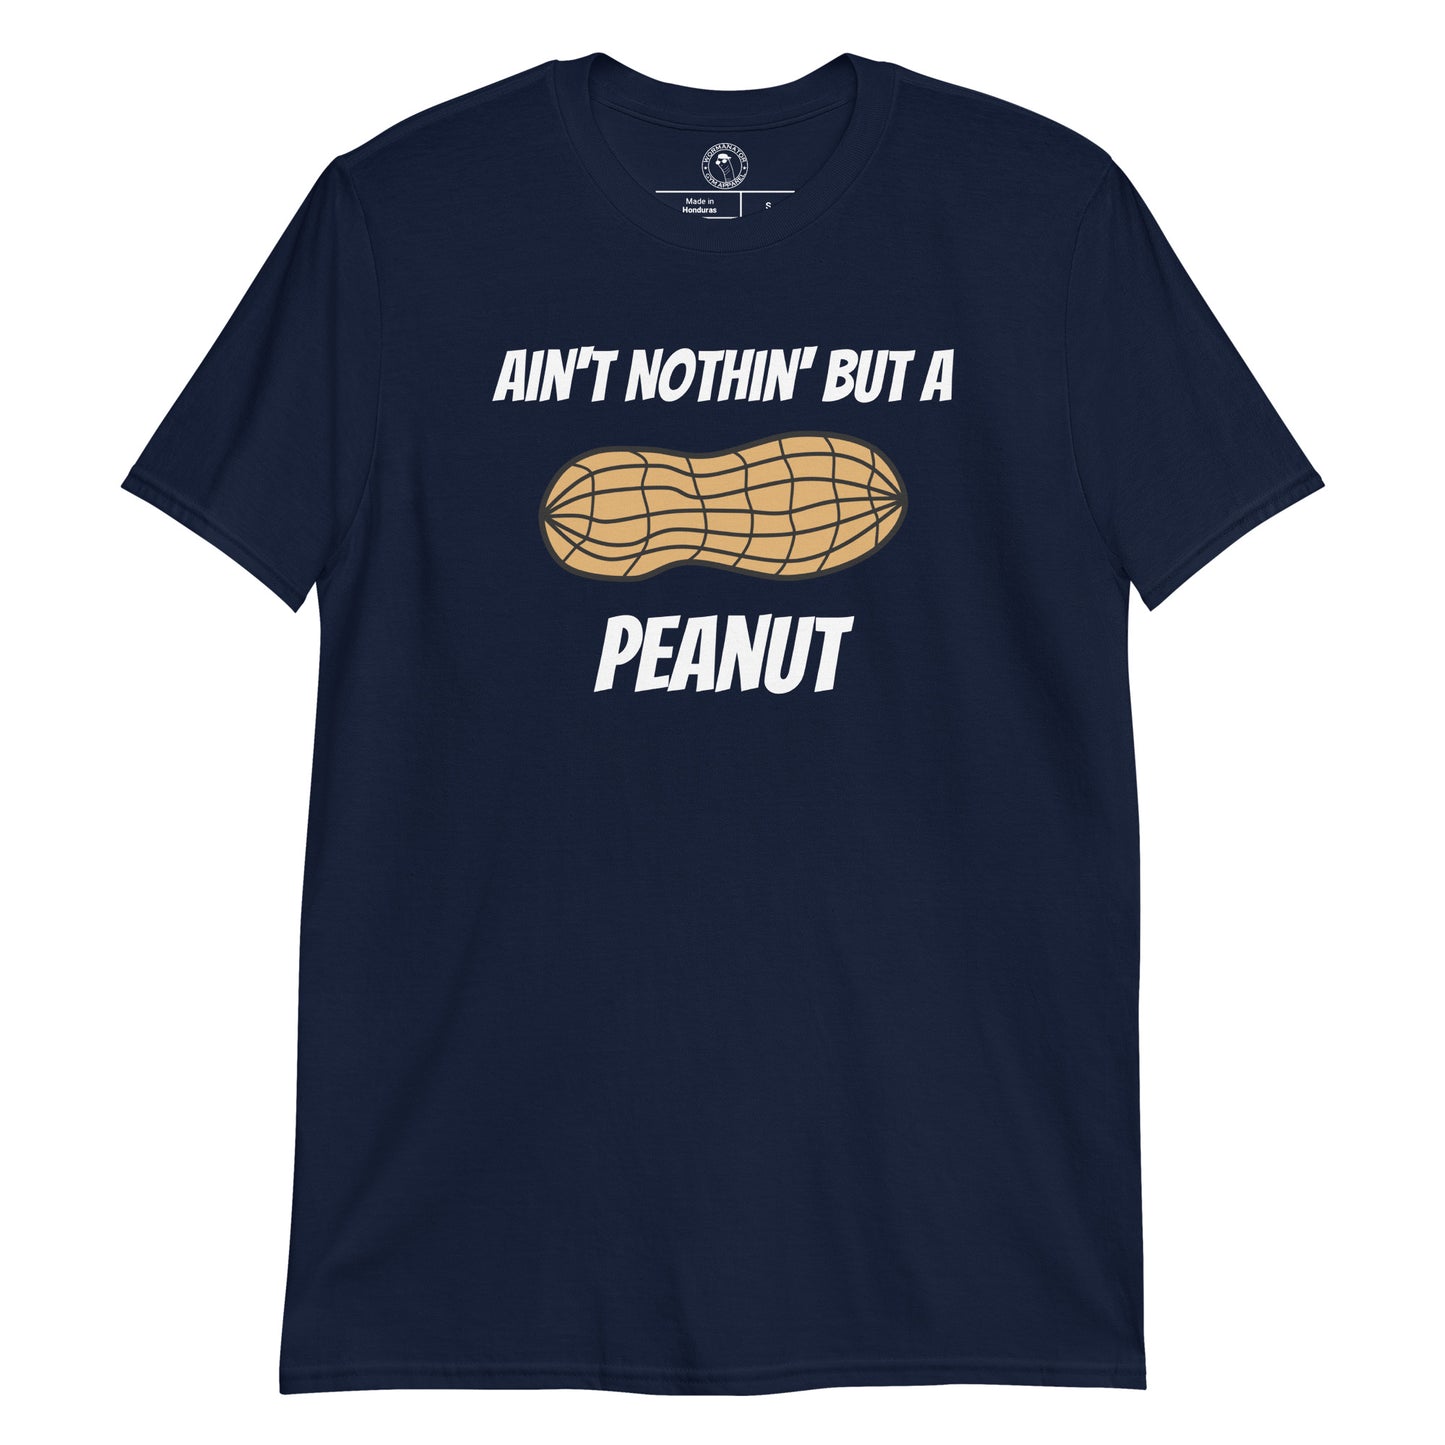 Ain't Nothin' but a Peanut Shirt in Navy